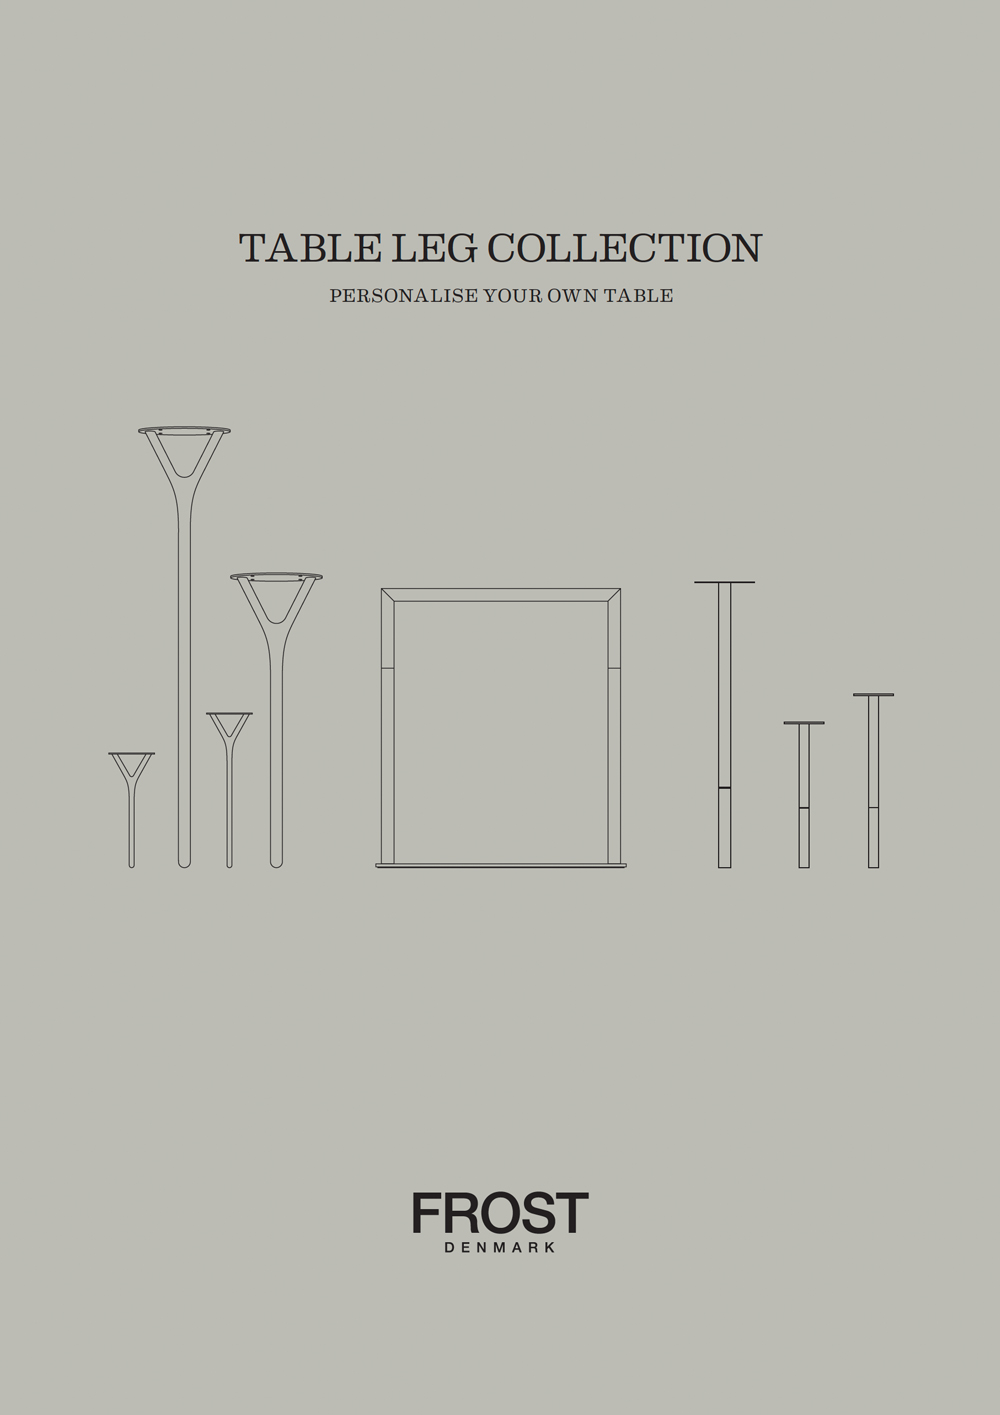 TABLE LEG COLLECTIONS